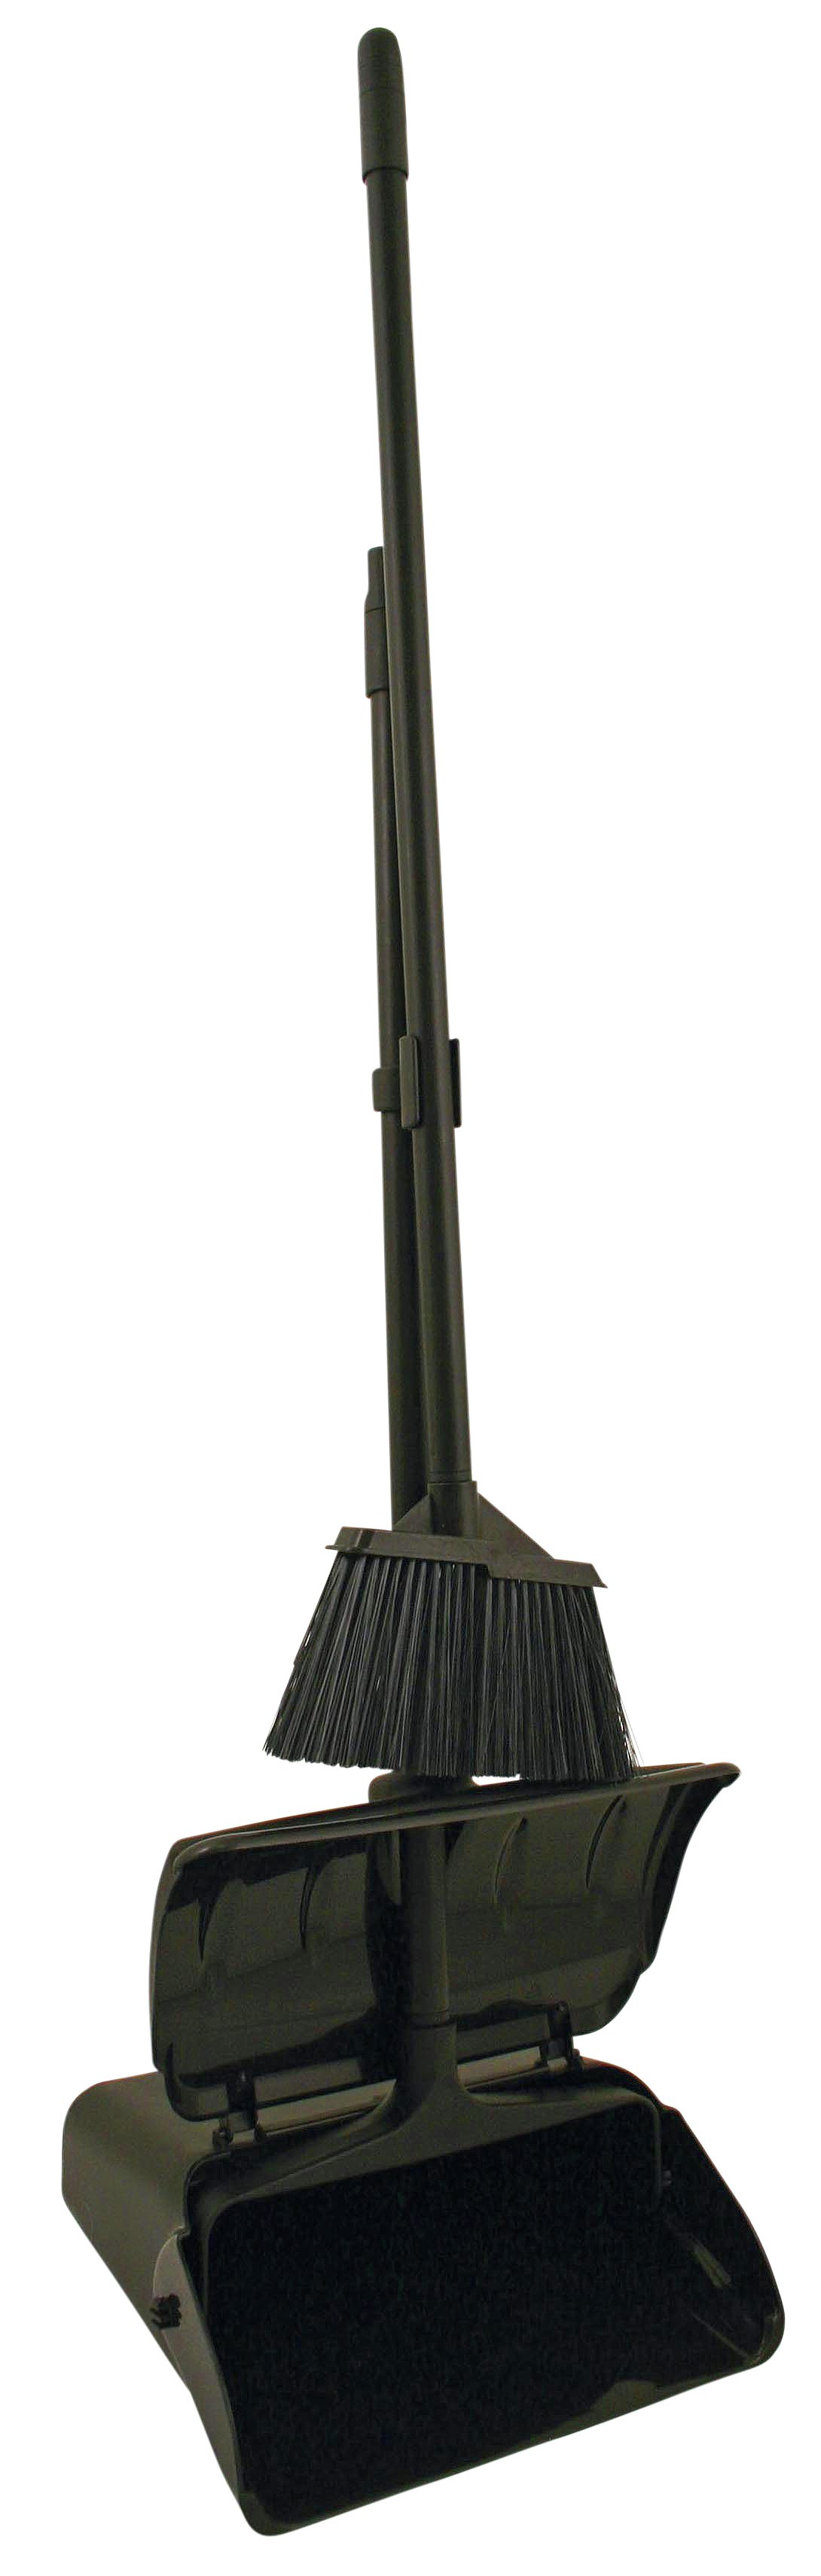 Bentley Professional Set of 2 Heavy Duty Dustpan and Brush